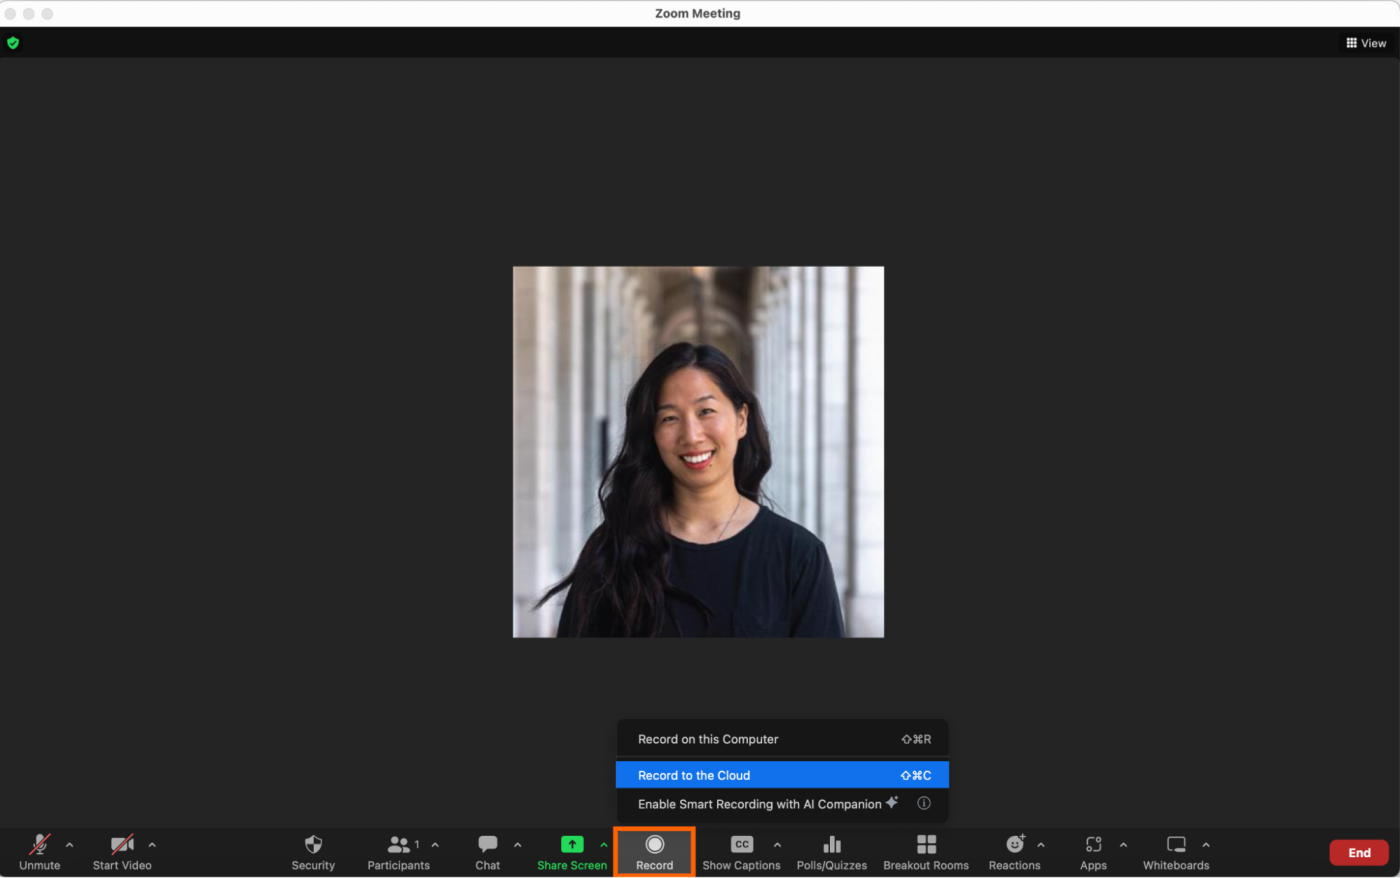 How to record a Zoom meeting locally or to the cloud.